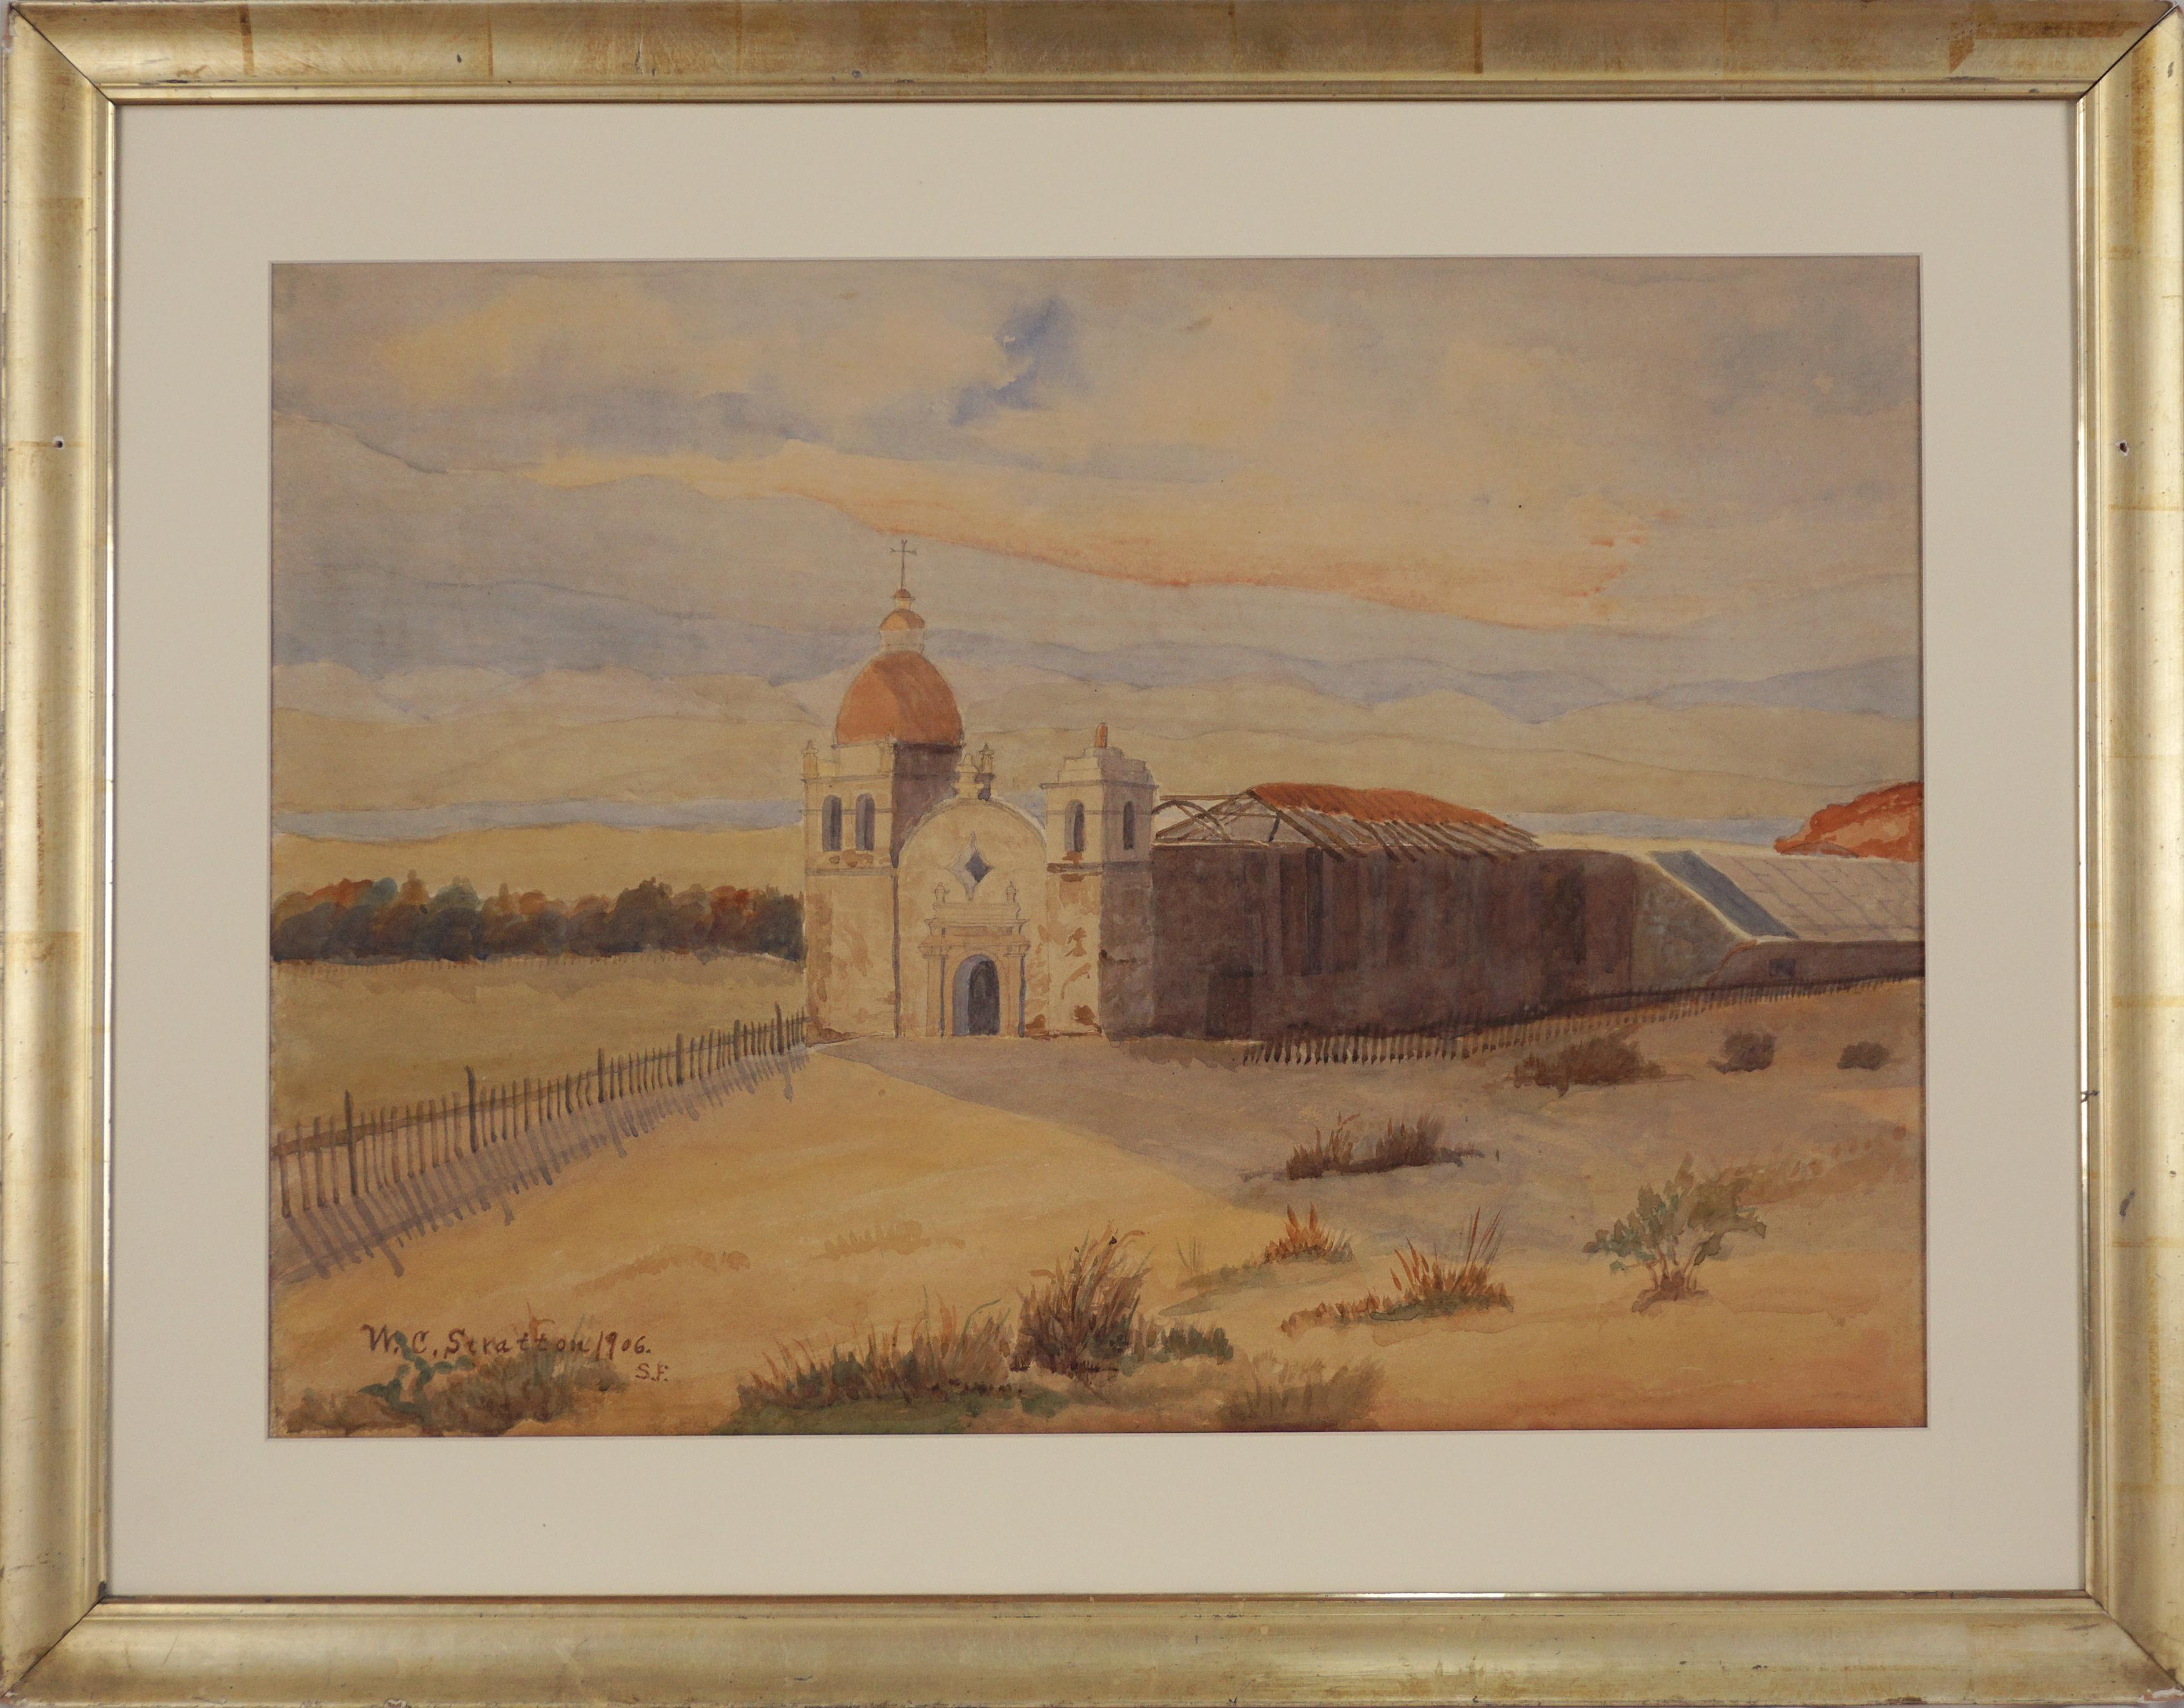 Early 20th Century Mission Carmel, California Watercolor. 